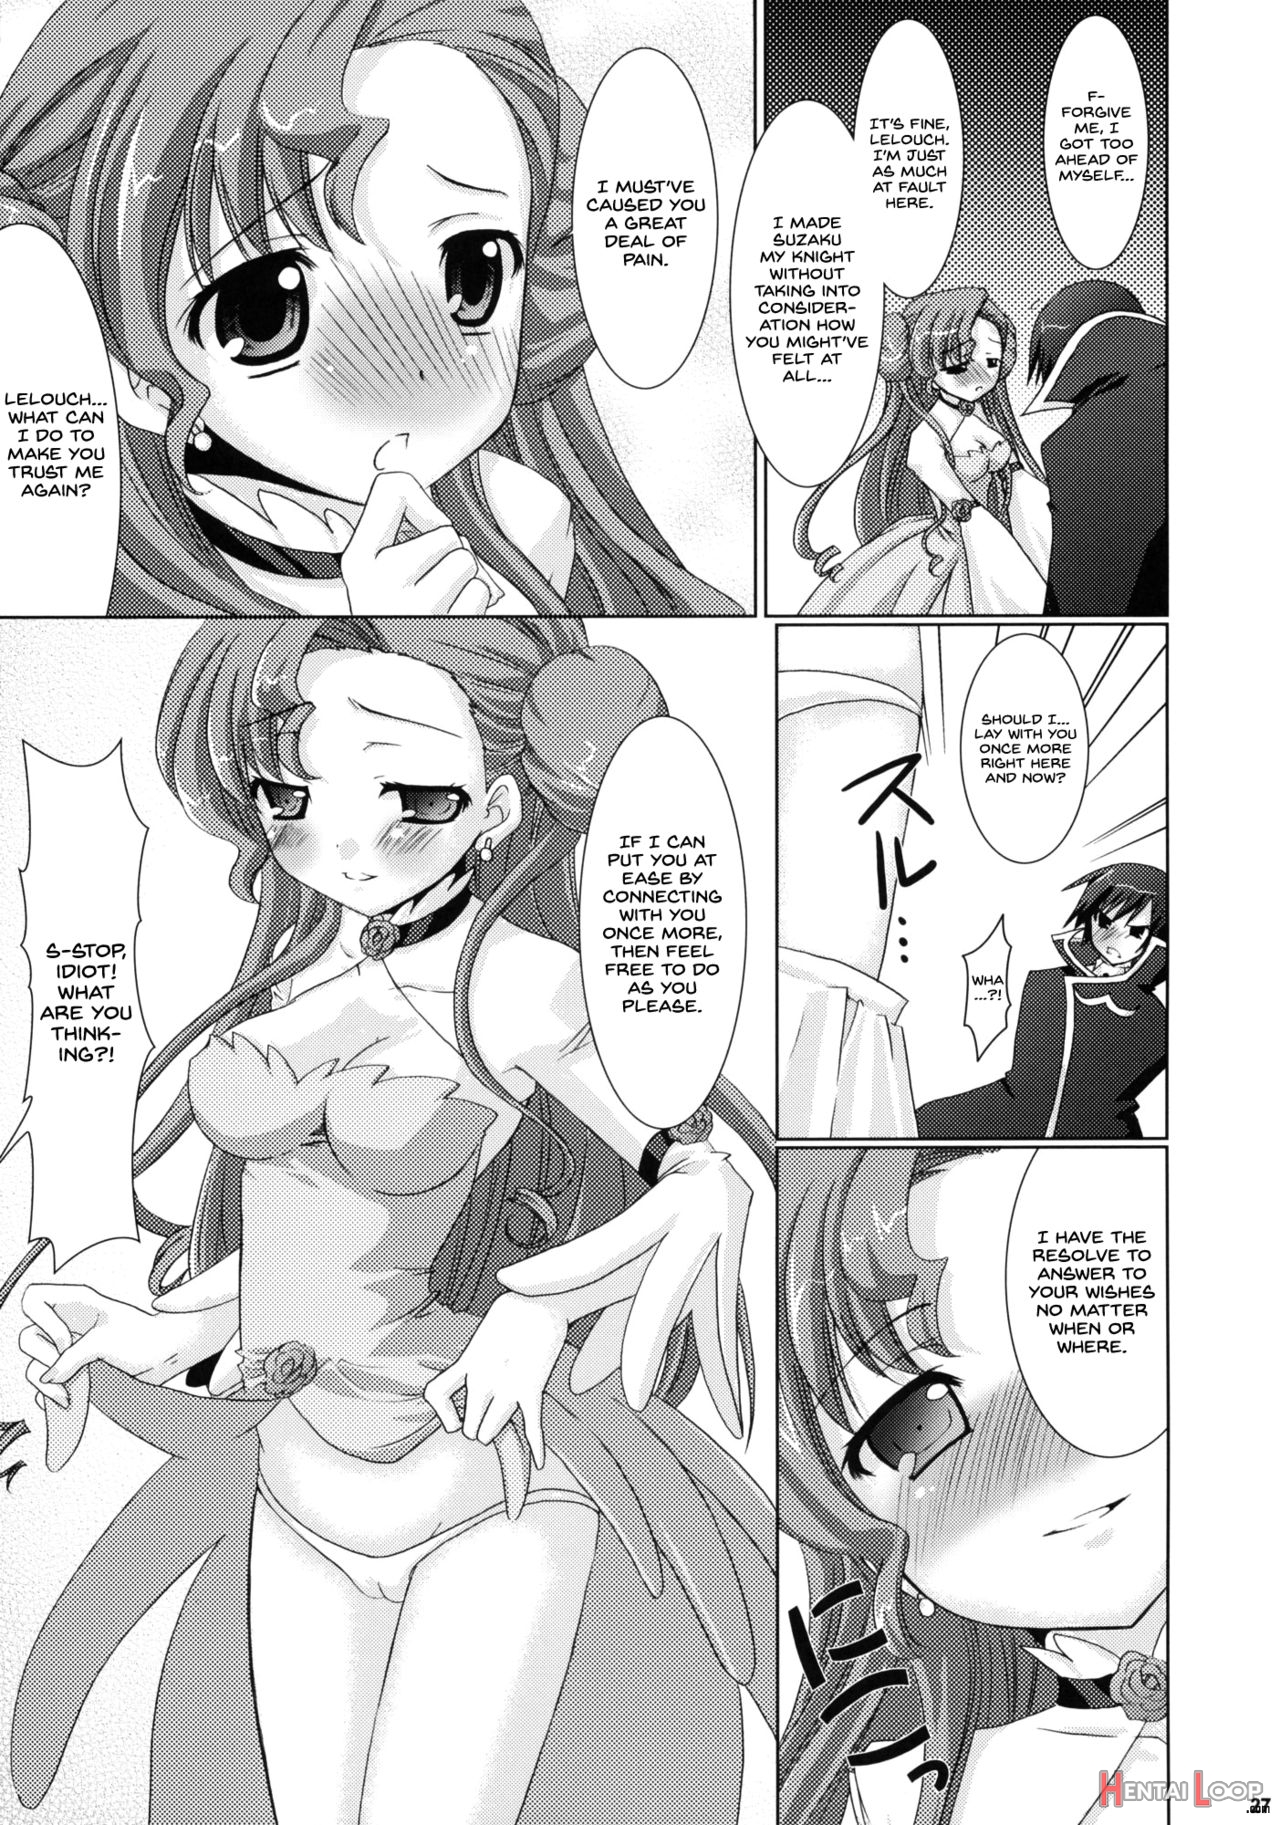 Kouhime Kyouhime page 27